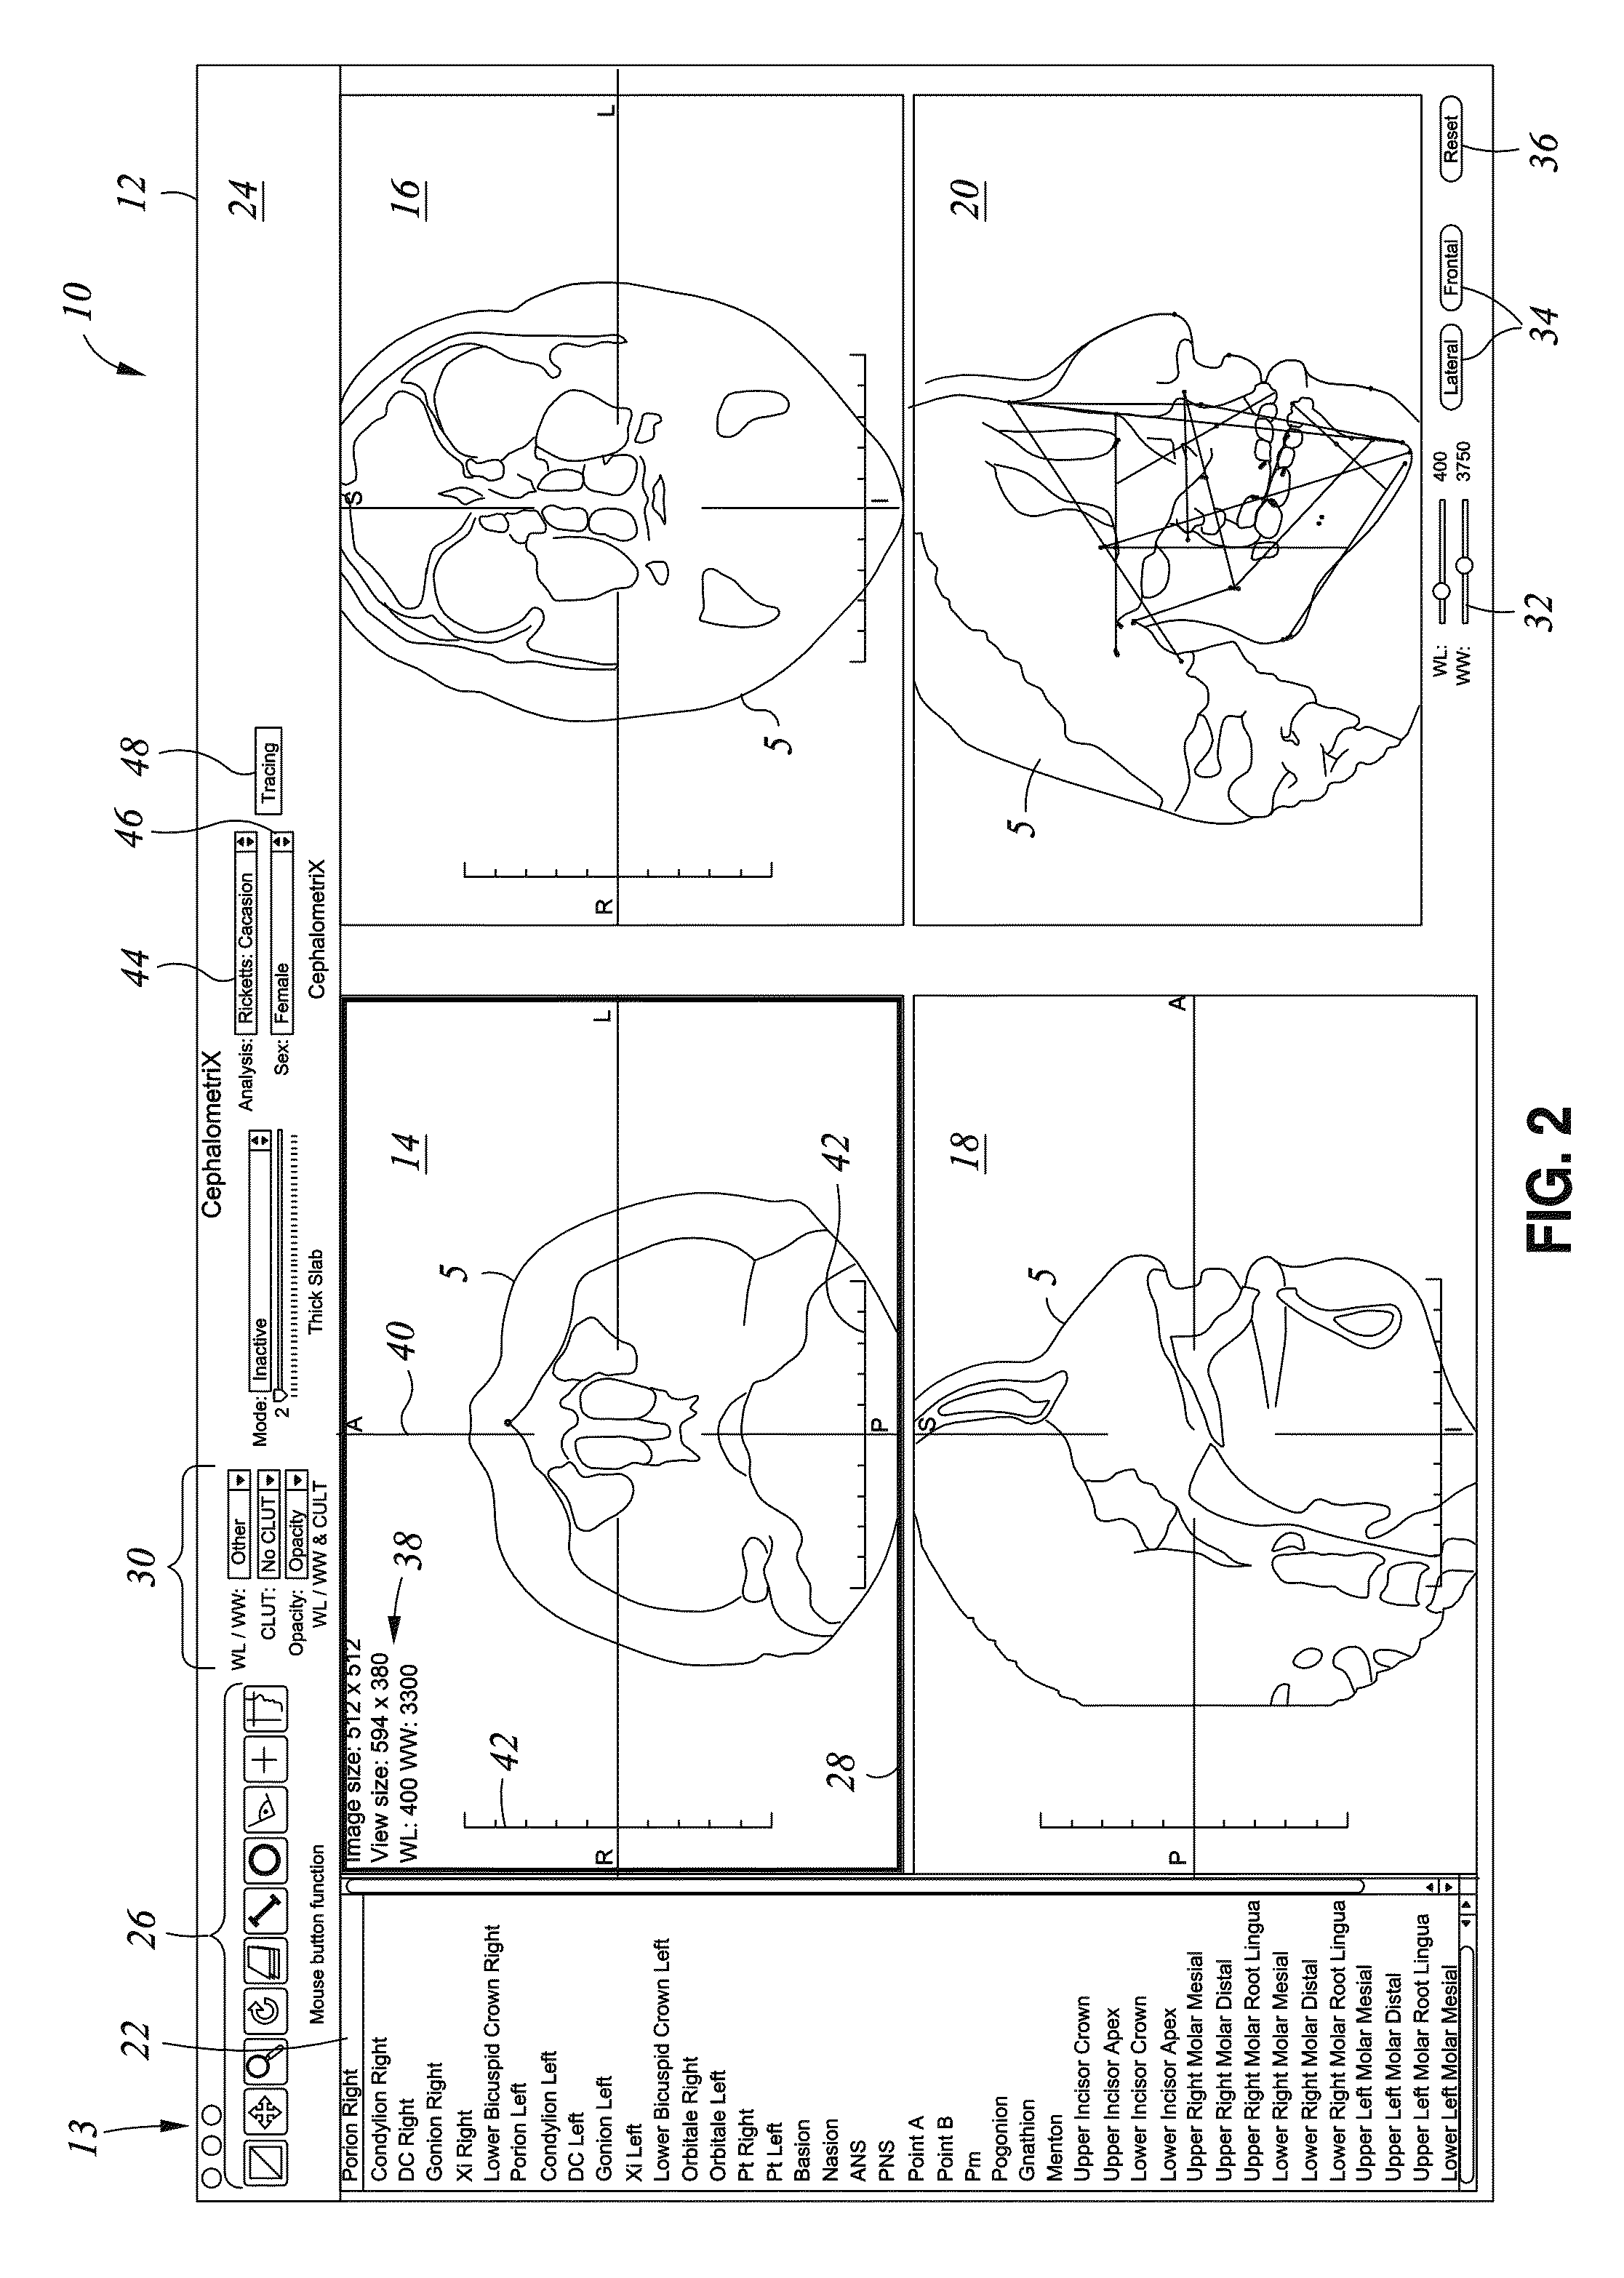 Method and system for orthodontic diagnosis